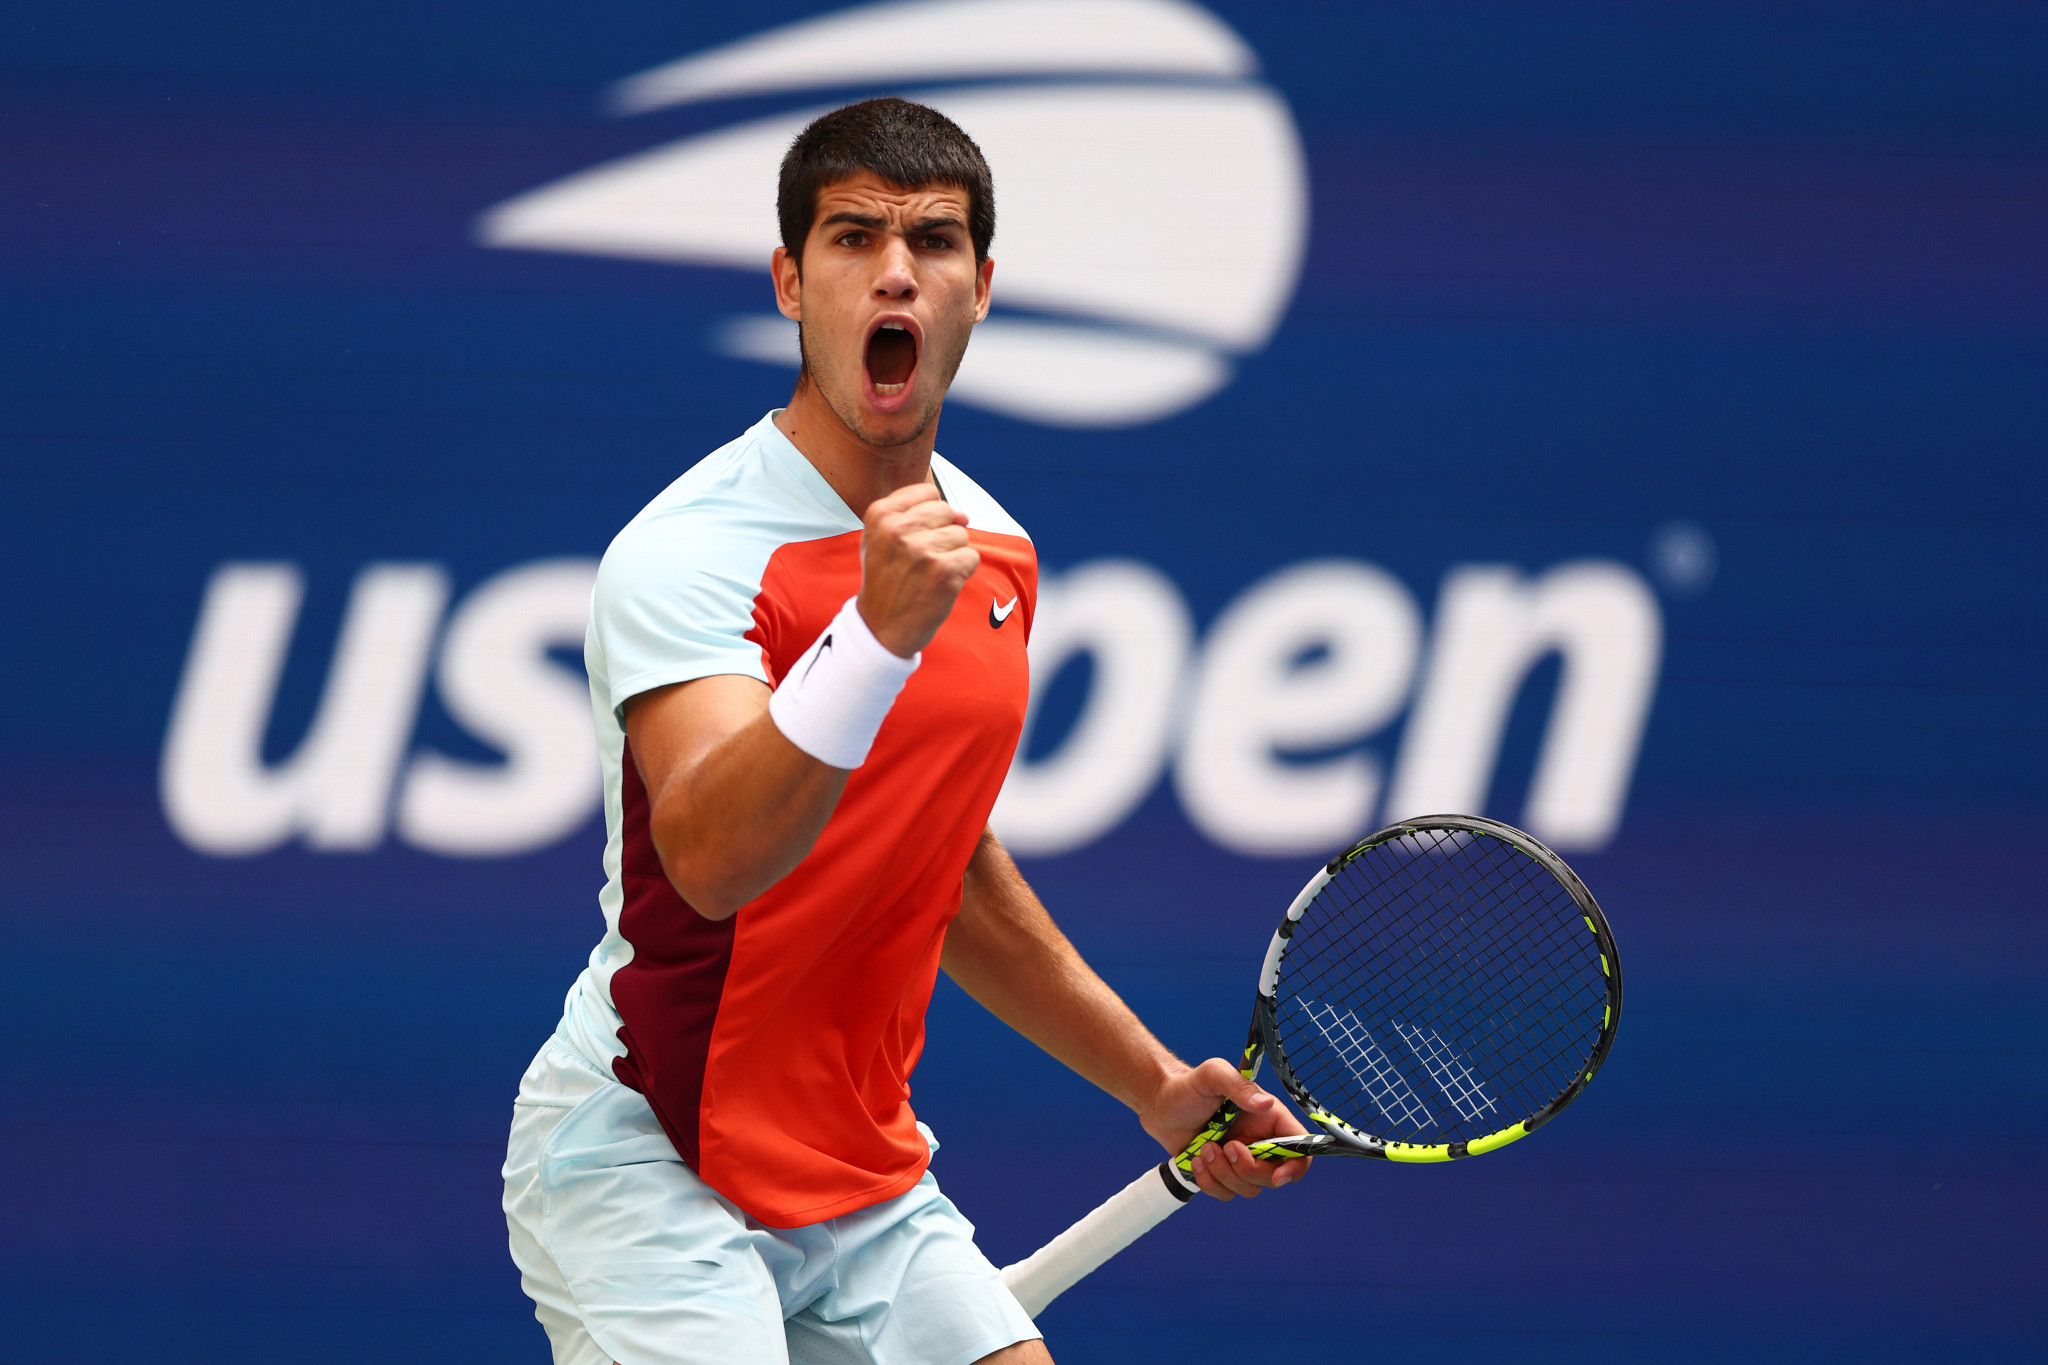 Spain's Carlos Alcaraz beat the United States' Jenson Brooksby in straight sets in the men's singles third round ©Getty Images